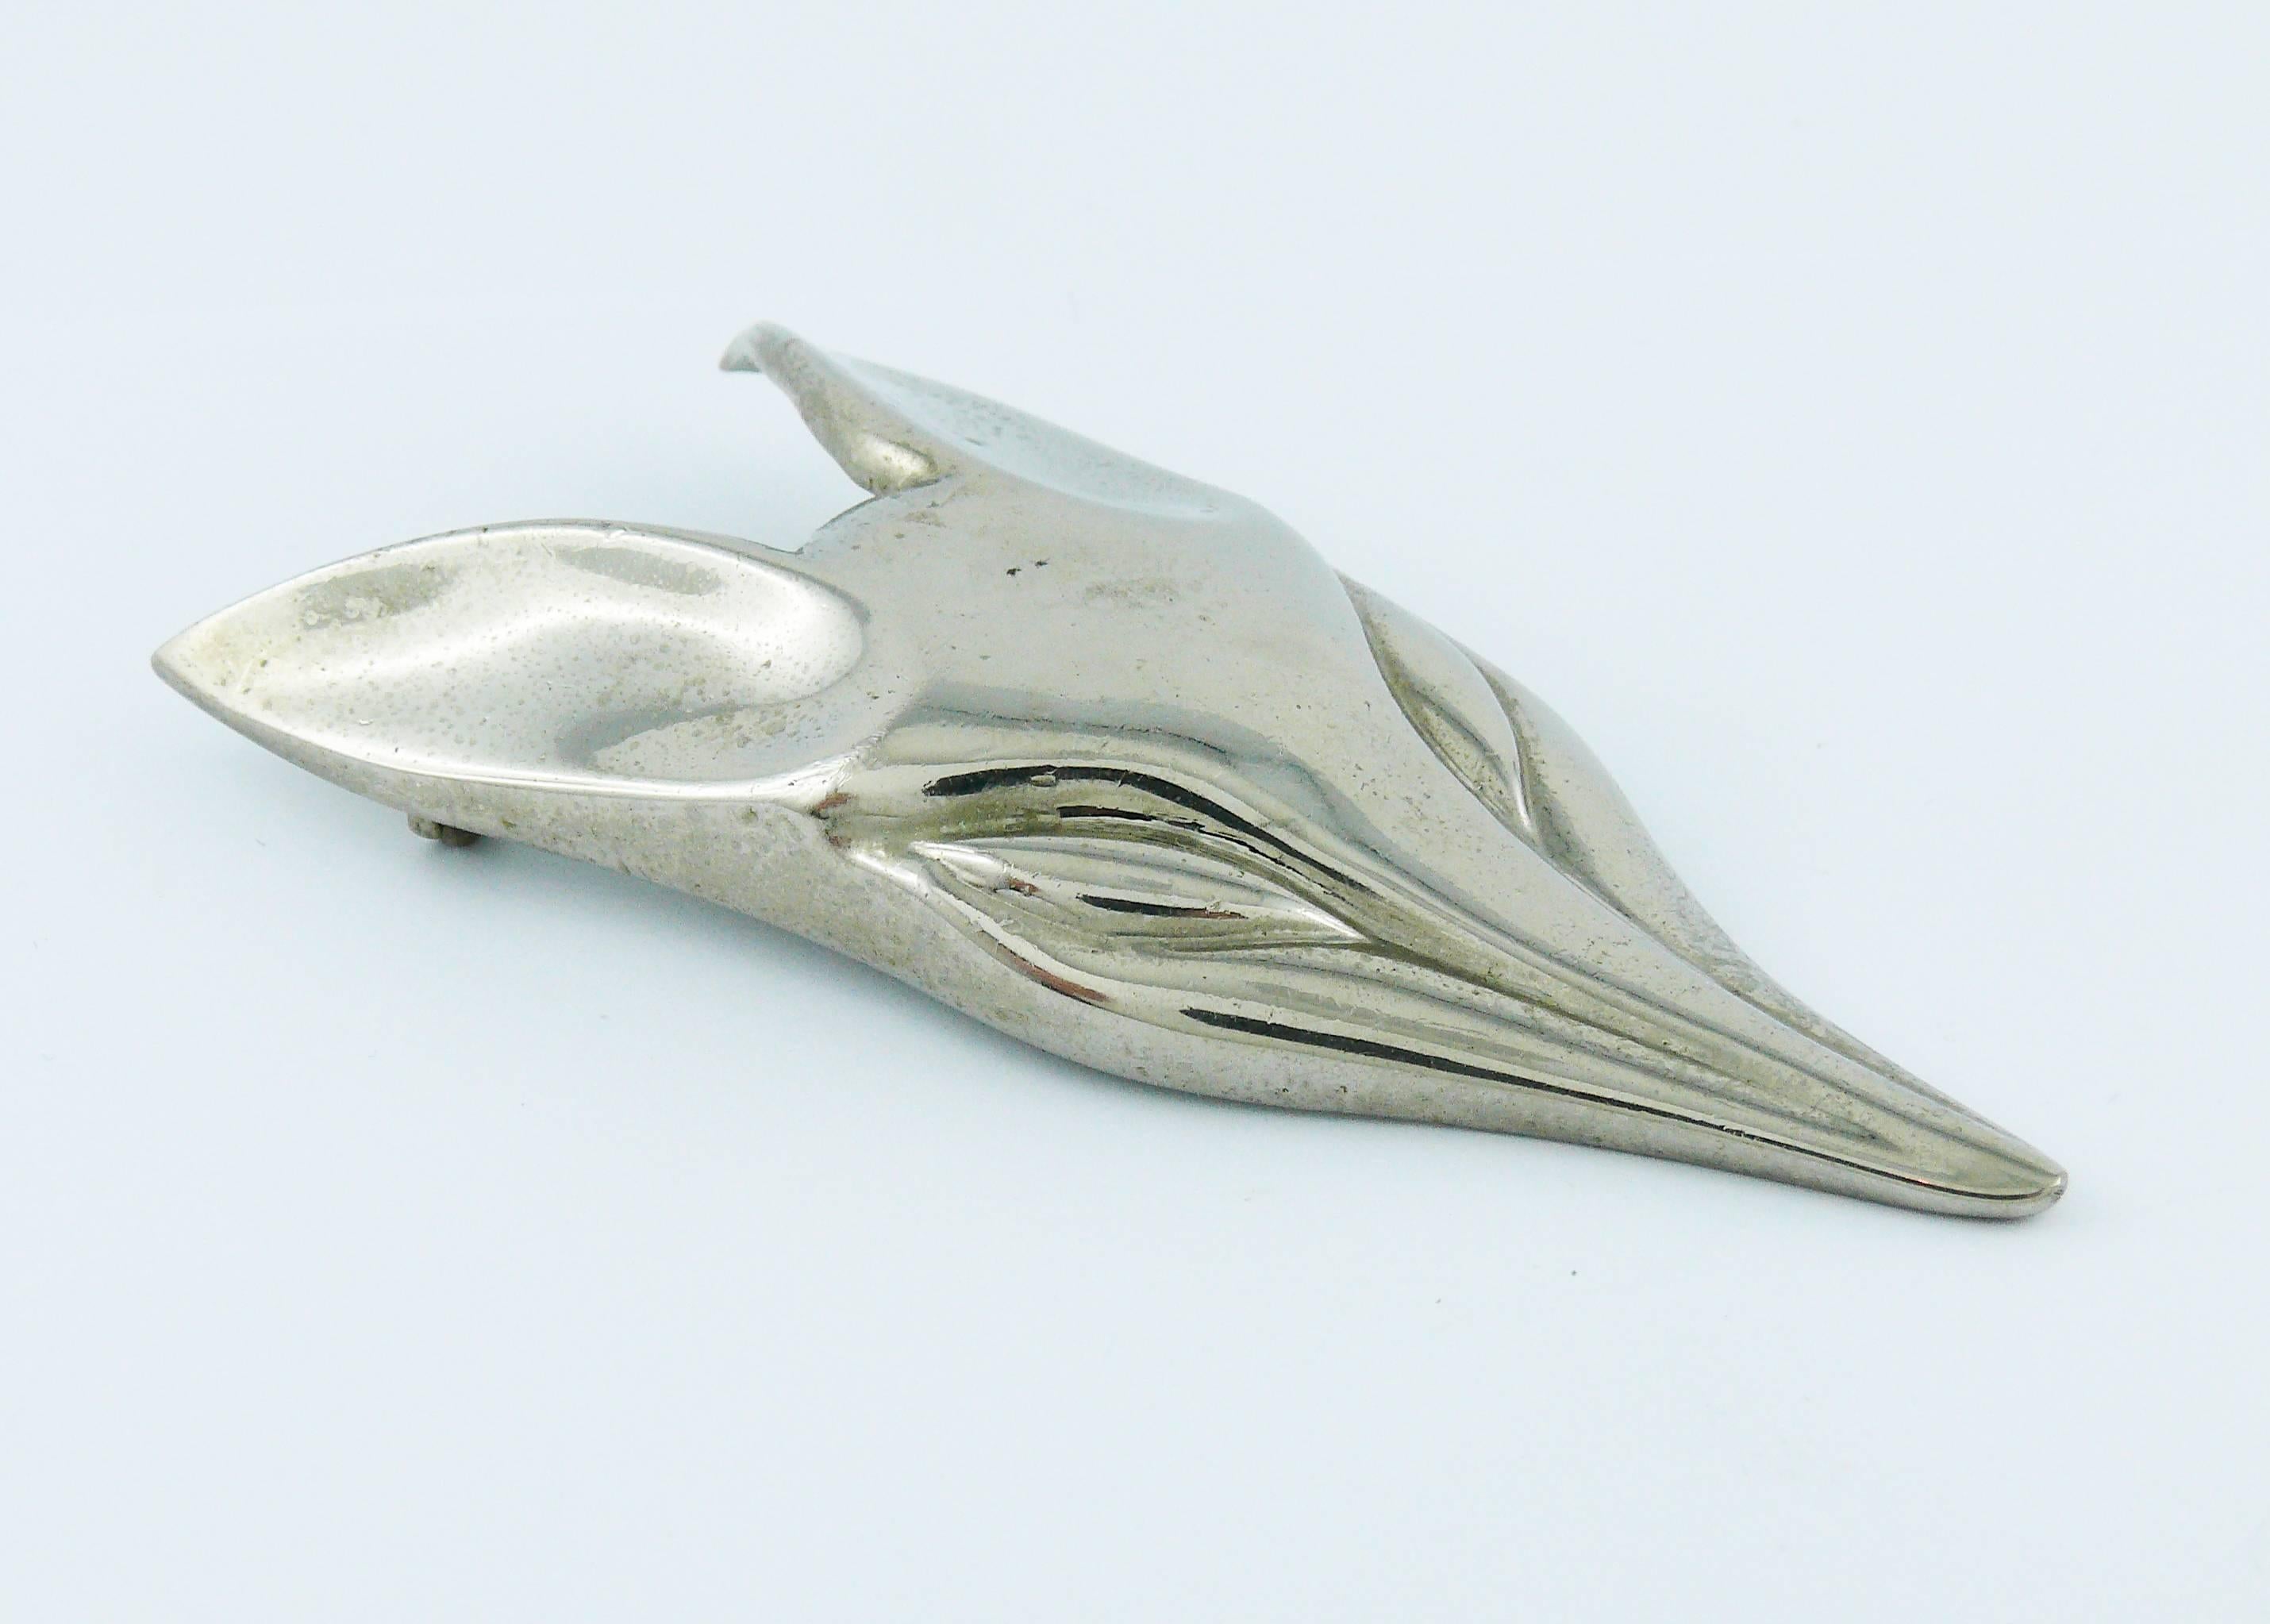 JEAN LOUIS SCHERRER vintage large silver toned Art Deco style fox head brooch.

Marked SCHERRER Paris.

Indicative measurements : max. height approx. 9.5 cm (3.74 inches) / max. length approx. 4.5 cm (1.77 inches).

JEWELRY CONDITION CHART
- New or